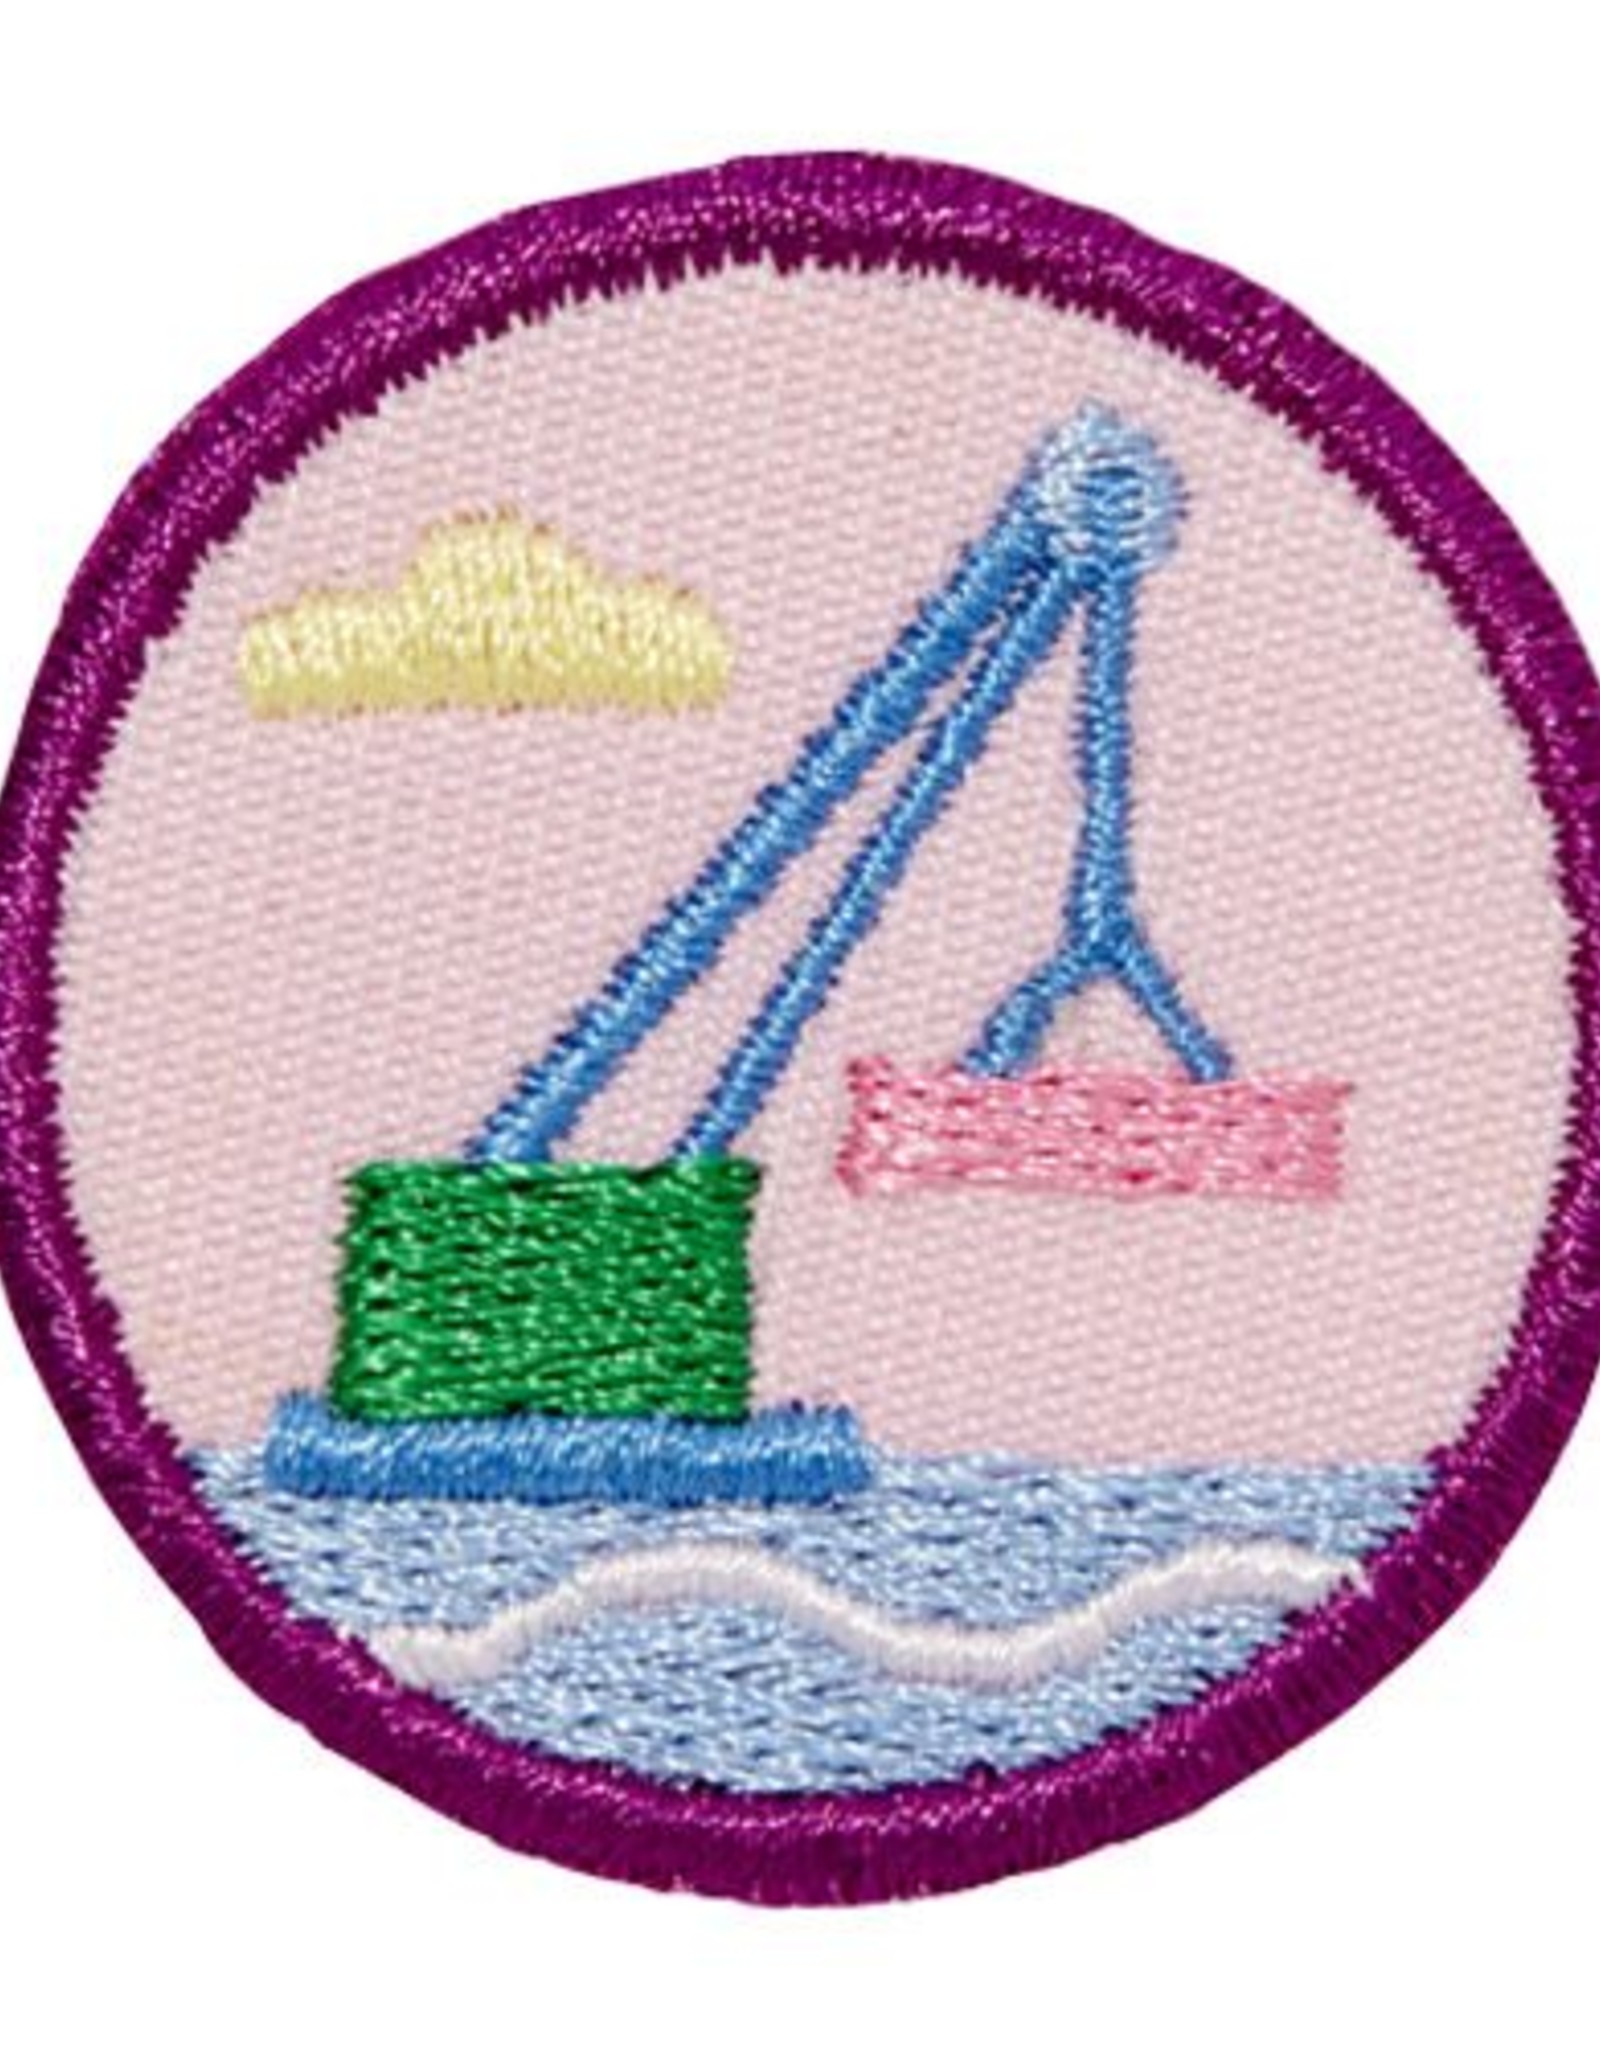 GIRL SCOUTS OF THE USA Junior Mechanical Engineering: Crane Badge